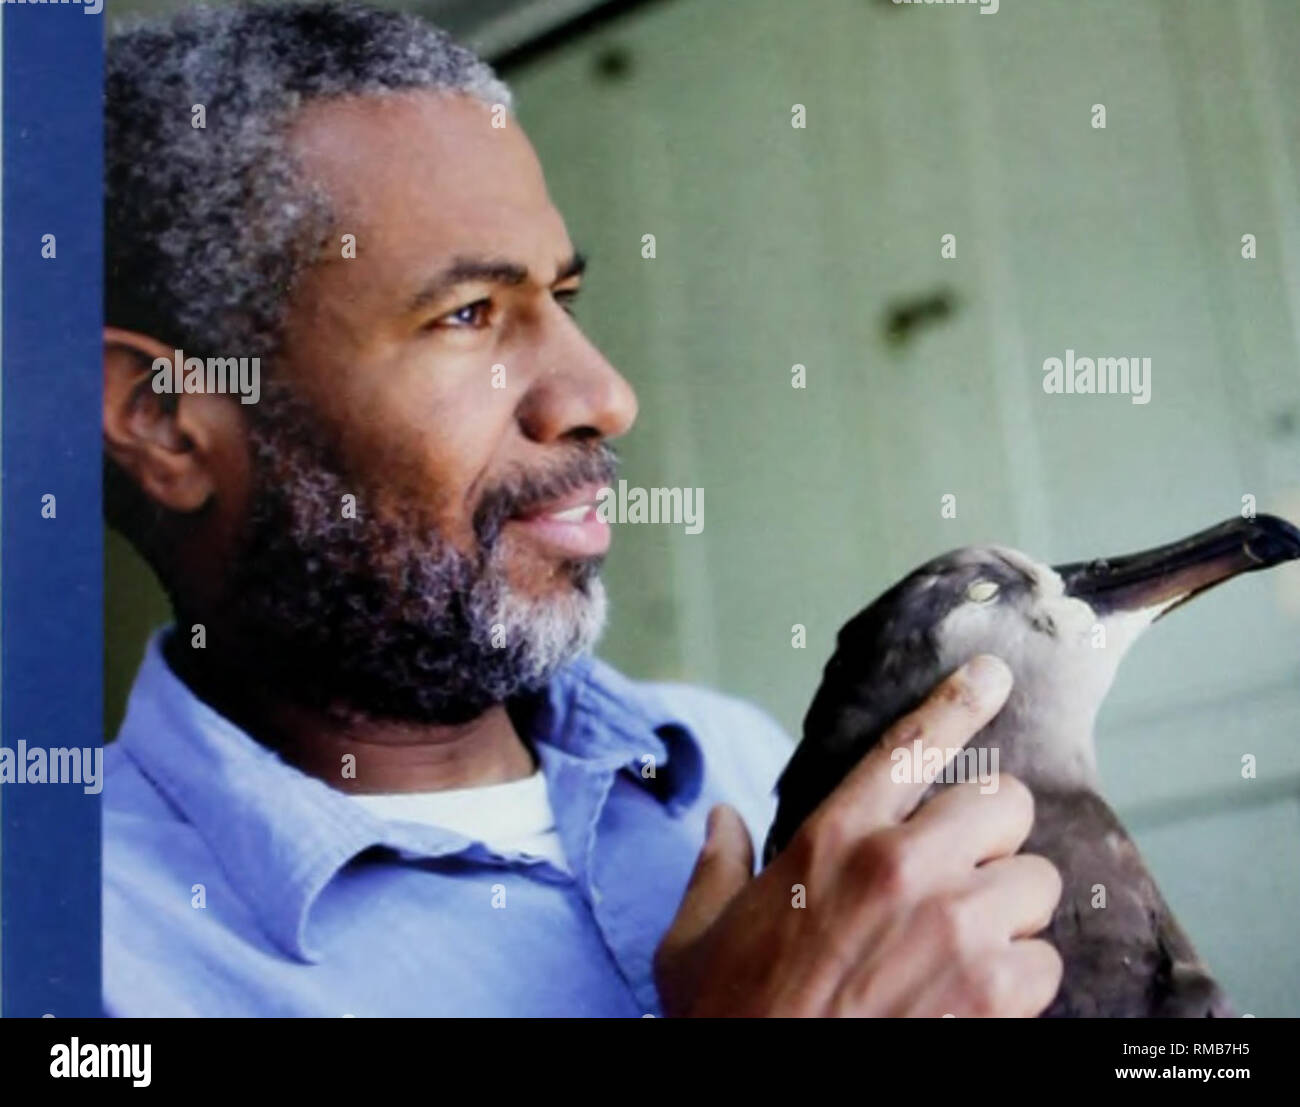 . Annual report. Harvard University. Museum of Comparative Zoology. Scott V. Edwards Professor of Organismic and Evolutionary Biology Alexander Agassiz Professor of Zoology Curator of Ornithology Prof. Edwards' research focuses on the evolutionary biology of birds and relatives, combining field, museunn and genomics approaches to understand the basis of avian diversity, evolution and behavior. Andrew A. Biewener Charles P. Lynuni Professor of Biology Director, Concord Field Station Prof. Biewener's research focuses on understanding the biomechanics, neiiromiisciilar contr ol and energetics of  Stock Photo